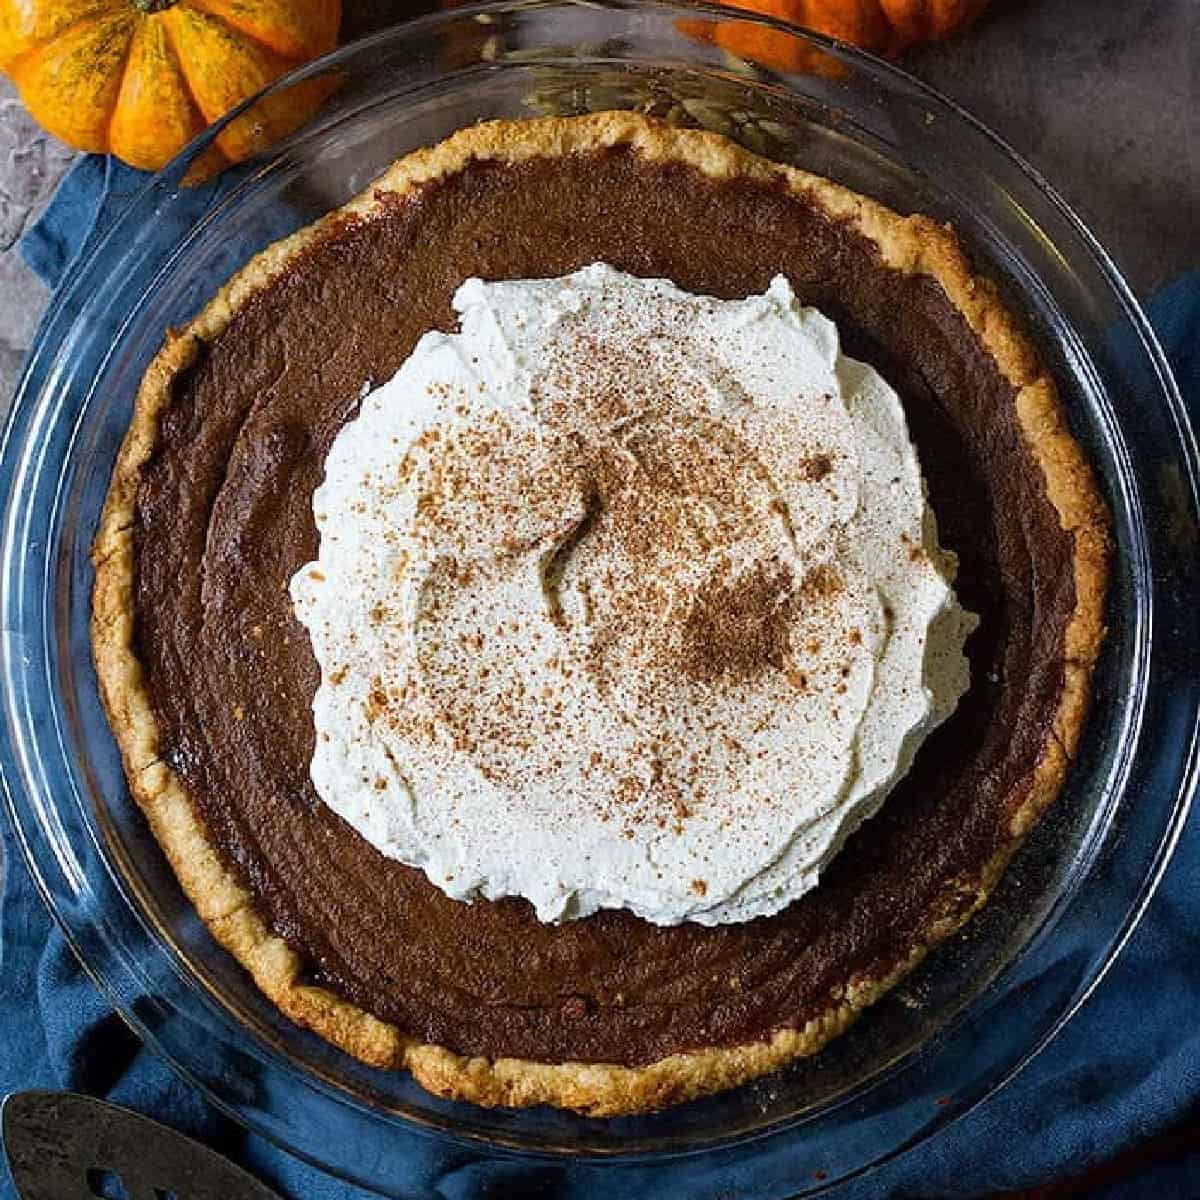 Homemade pumpkin pie with chai spice is exceptionally delicious. Warm spices give this holiday classic a delicious twist.
